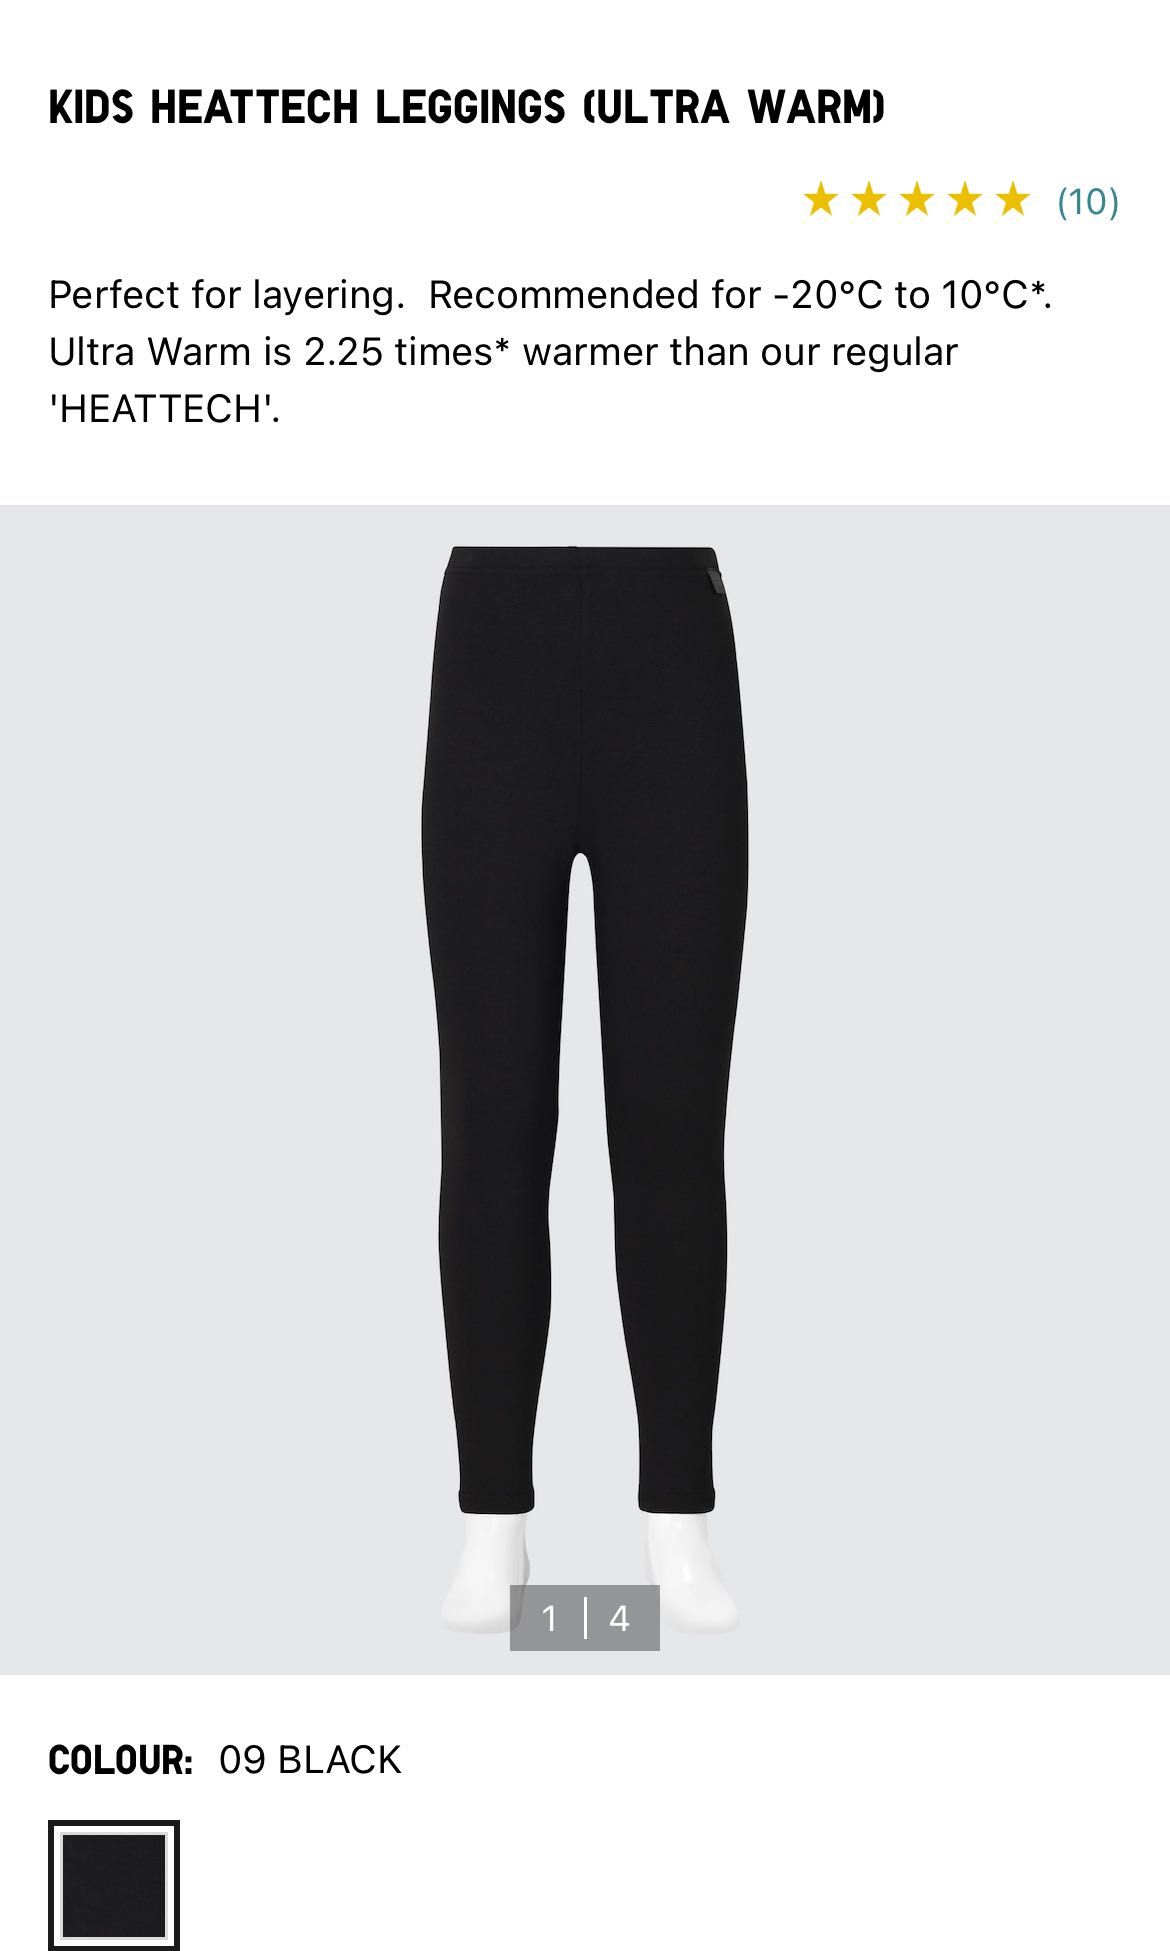 Uniqlo WOMEN HEATTECH Ultra Warm Leggings XL Black and Dark Gray available,  Women's Fashion, Bottoms, Other Bottoms on Carousell